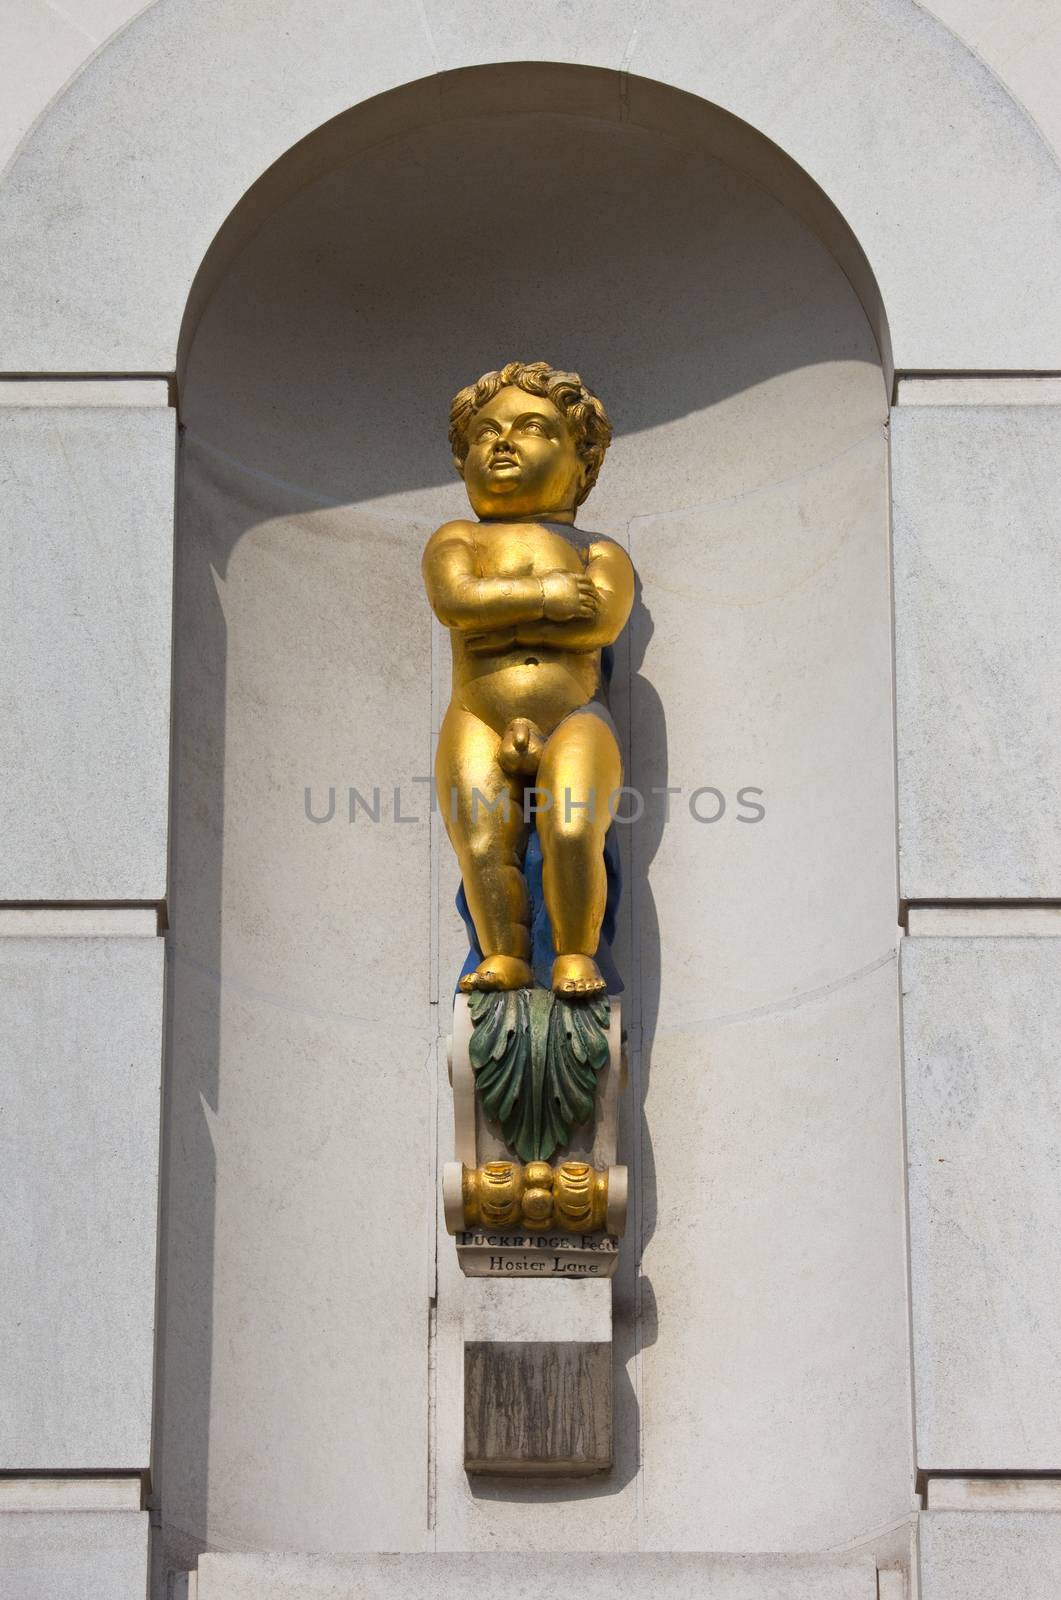 The Golden Boy of Pye Corner in the City of London.  The statue marks the location where the Great Fire of London was stopped in 1666.